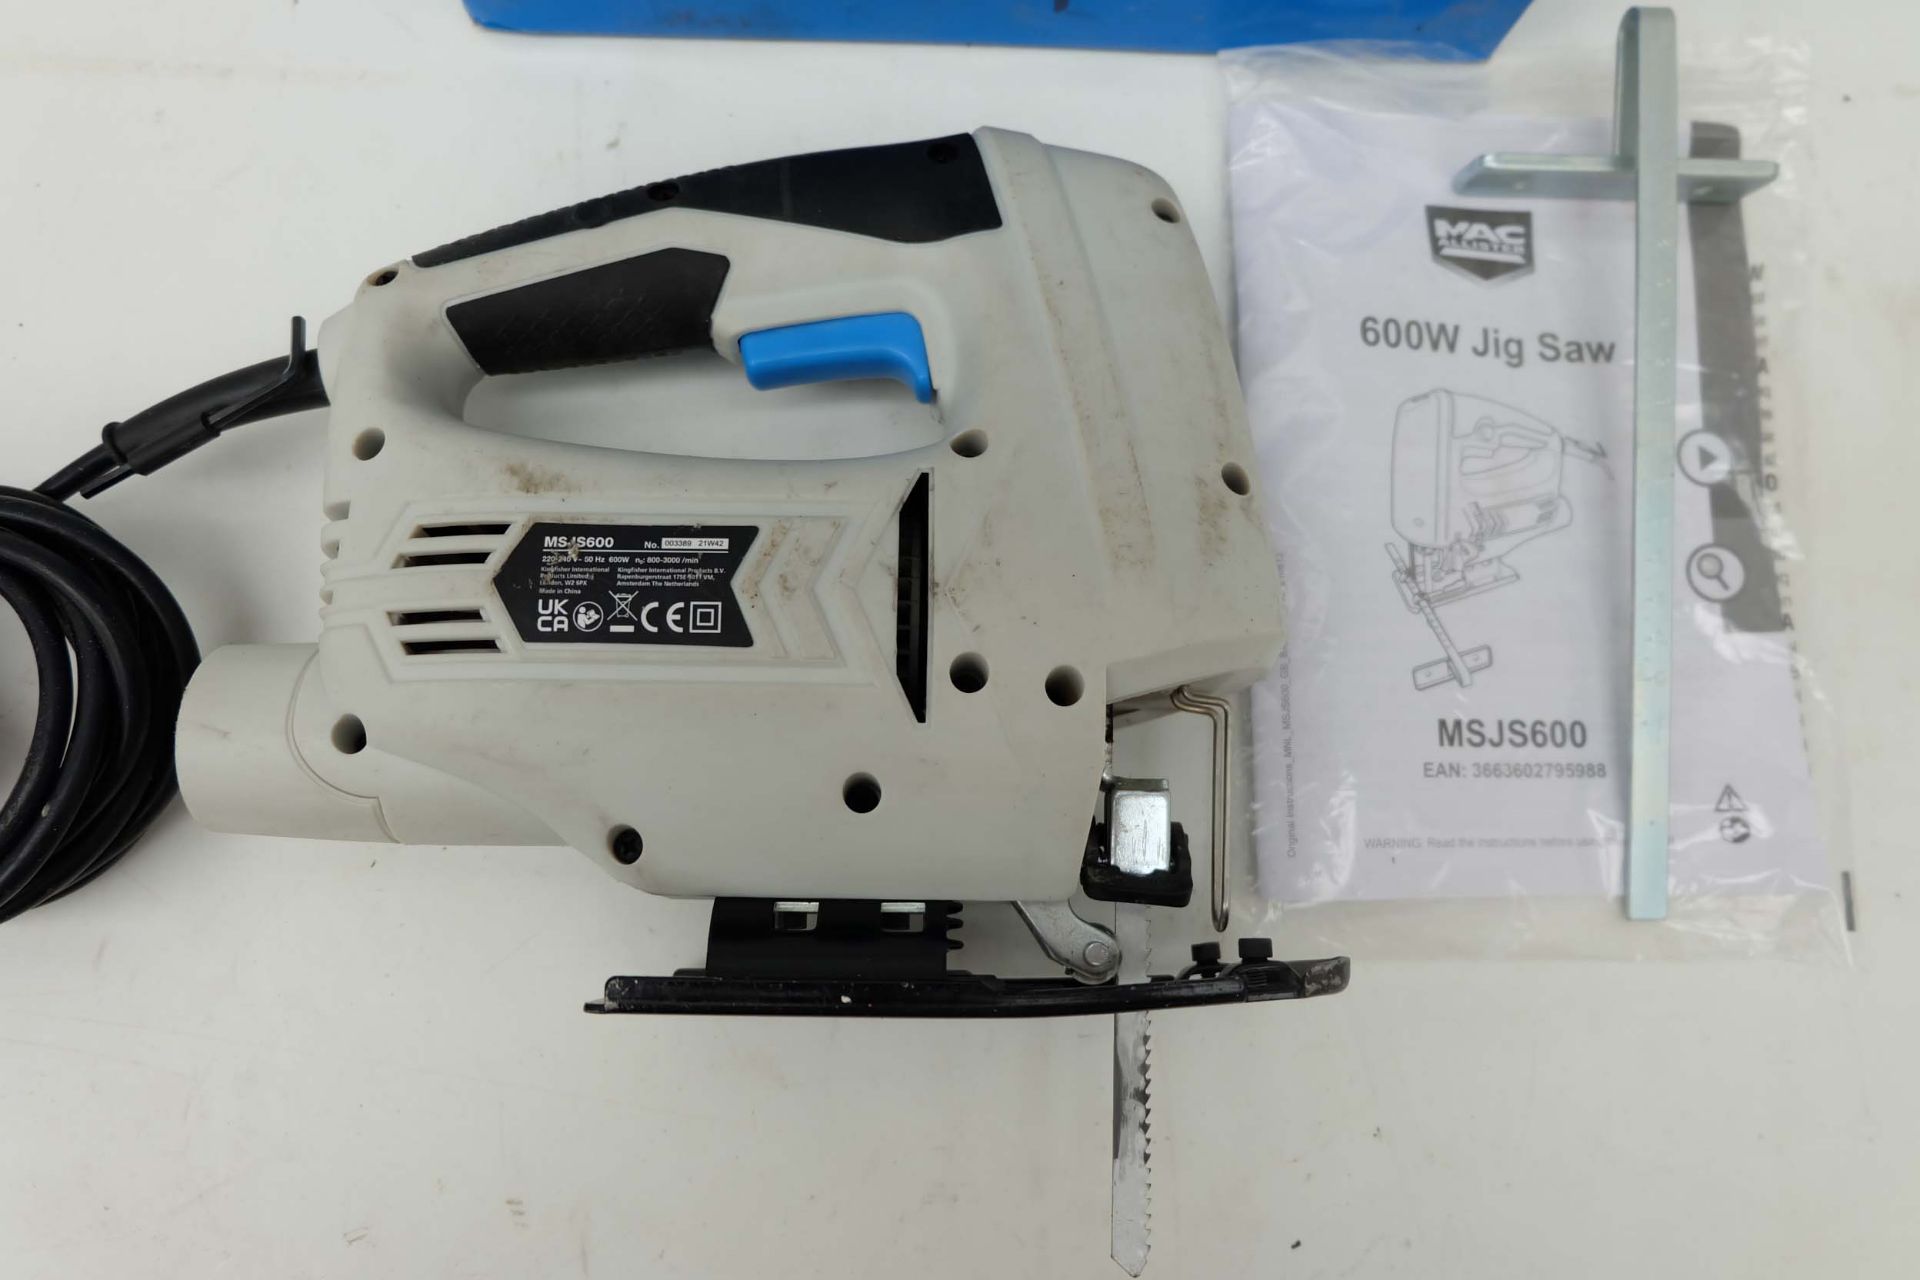 MacAllister MSJS600 Corded Jigsaw. Max Cutting Depth 80mm. Single Phase 600W. With Book and Box. - Image 3 of 5